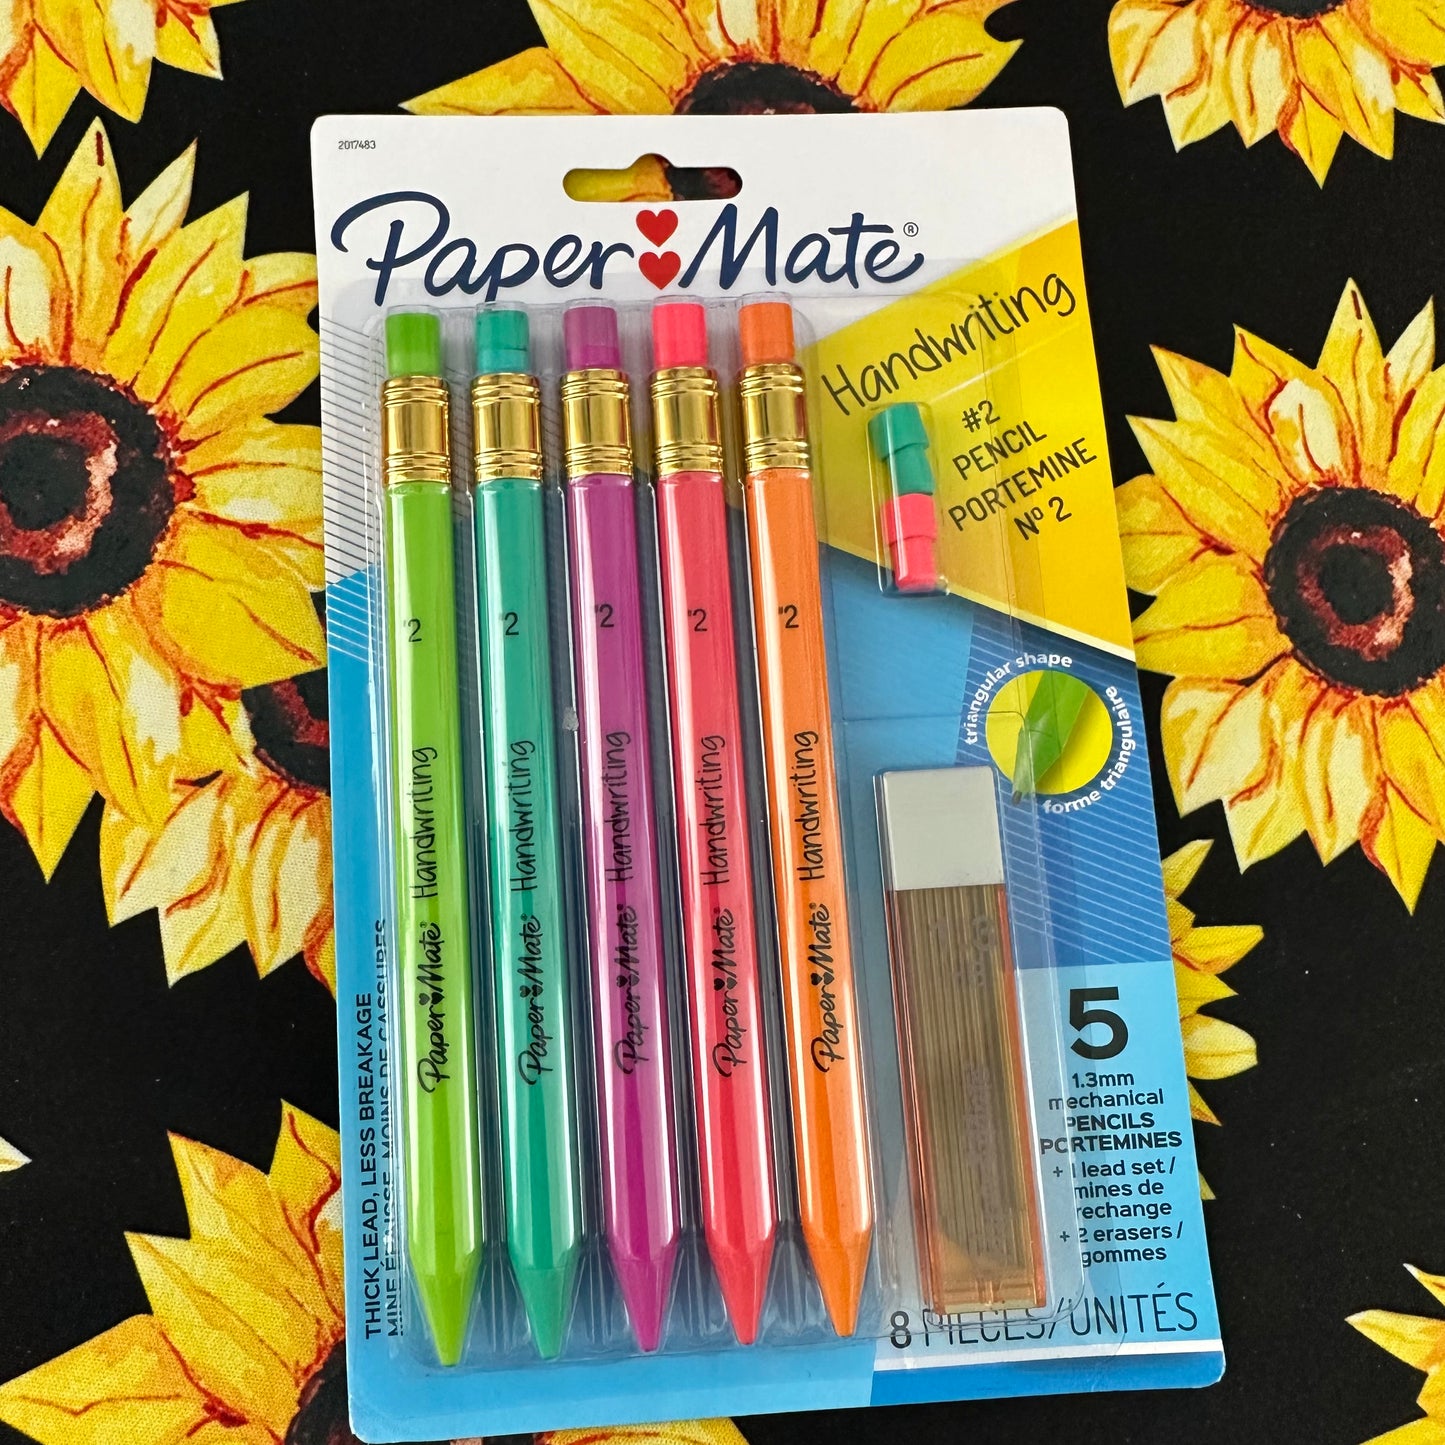 Ready to ship Glittered #2 Pencils